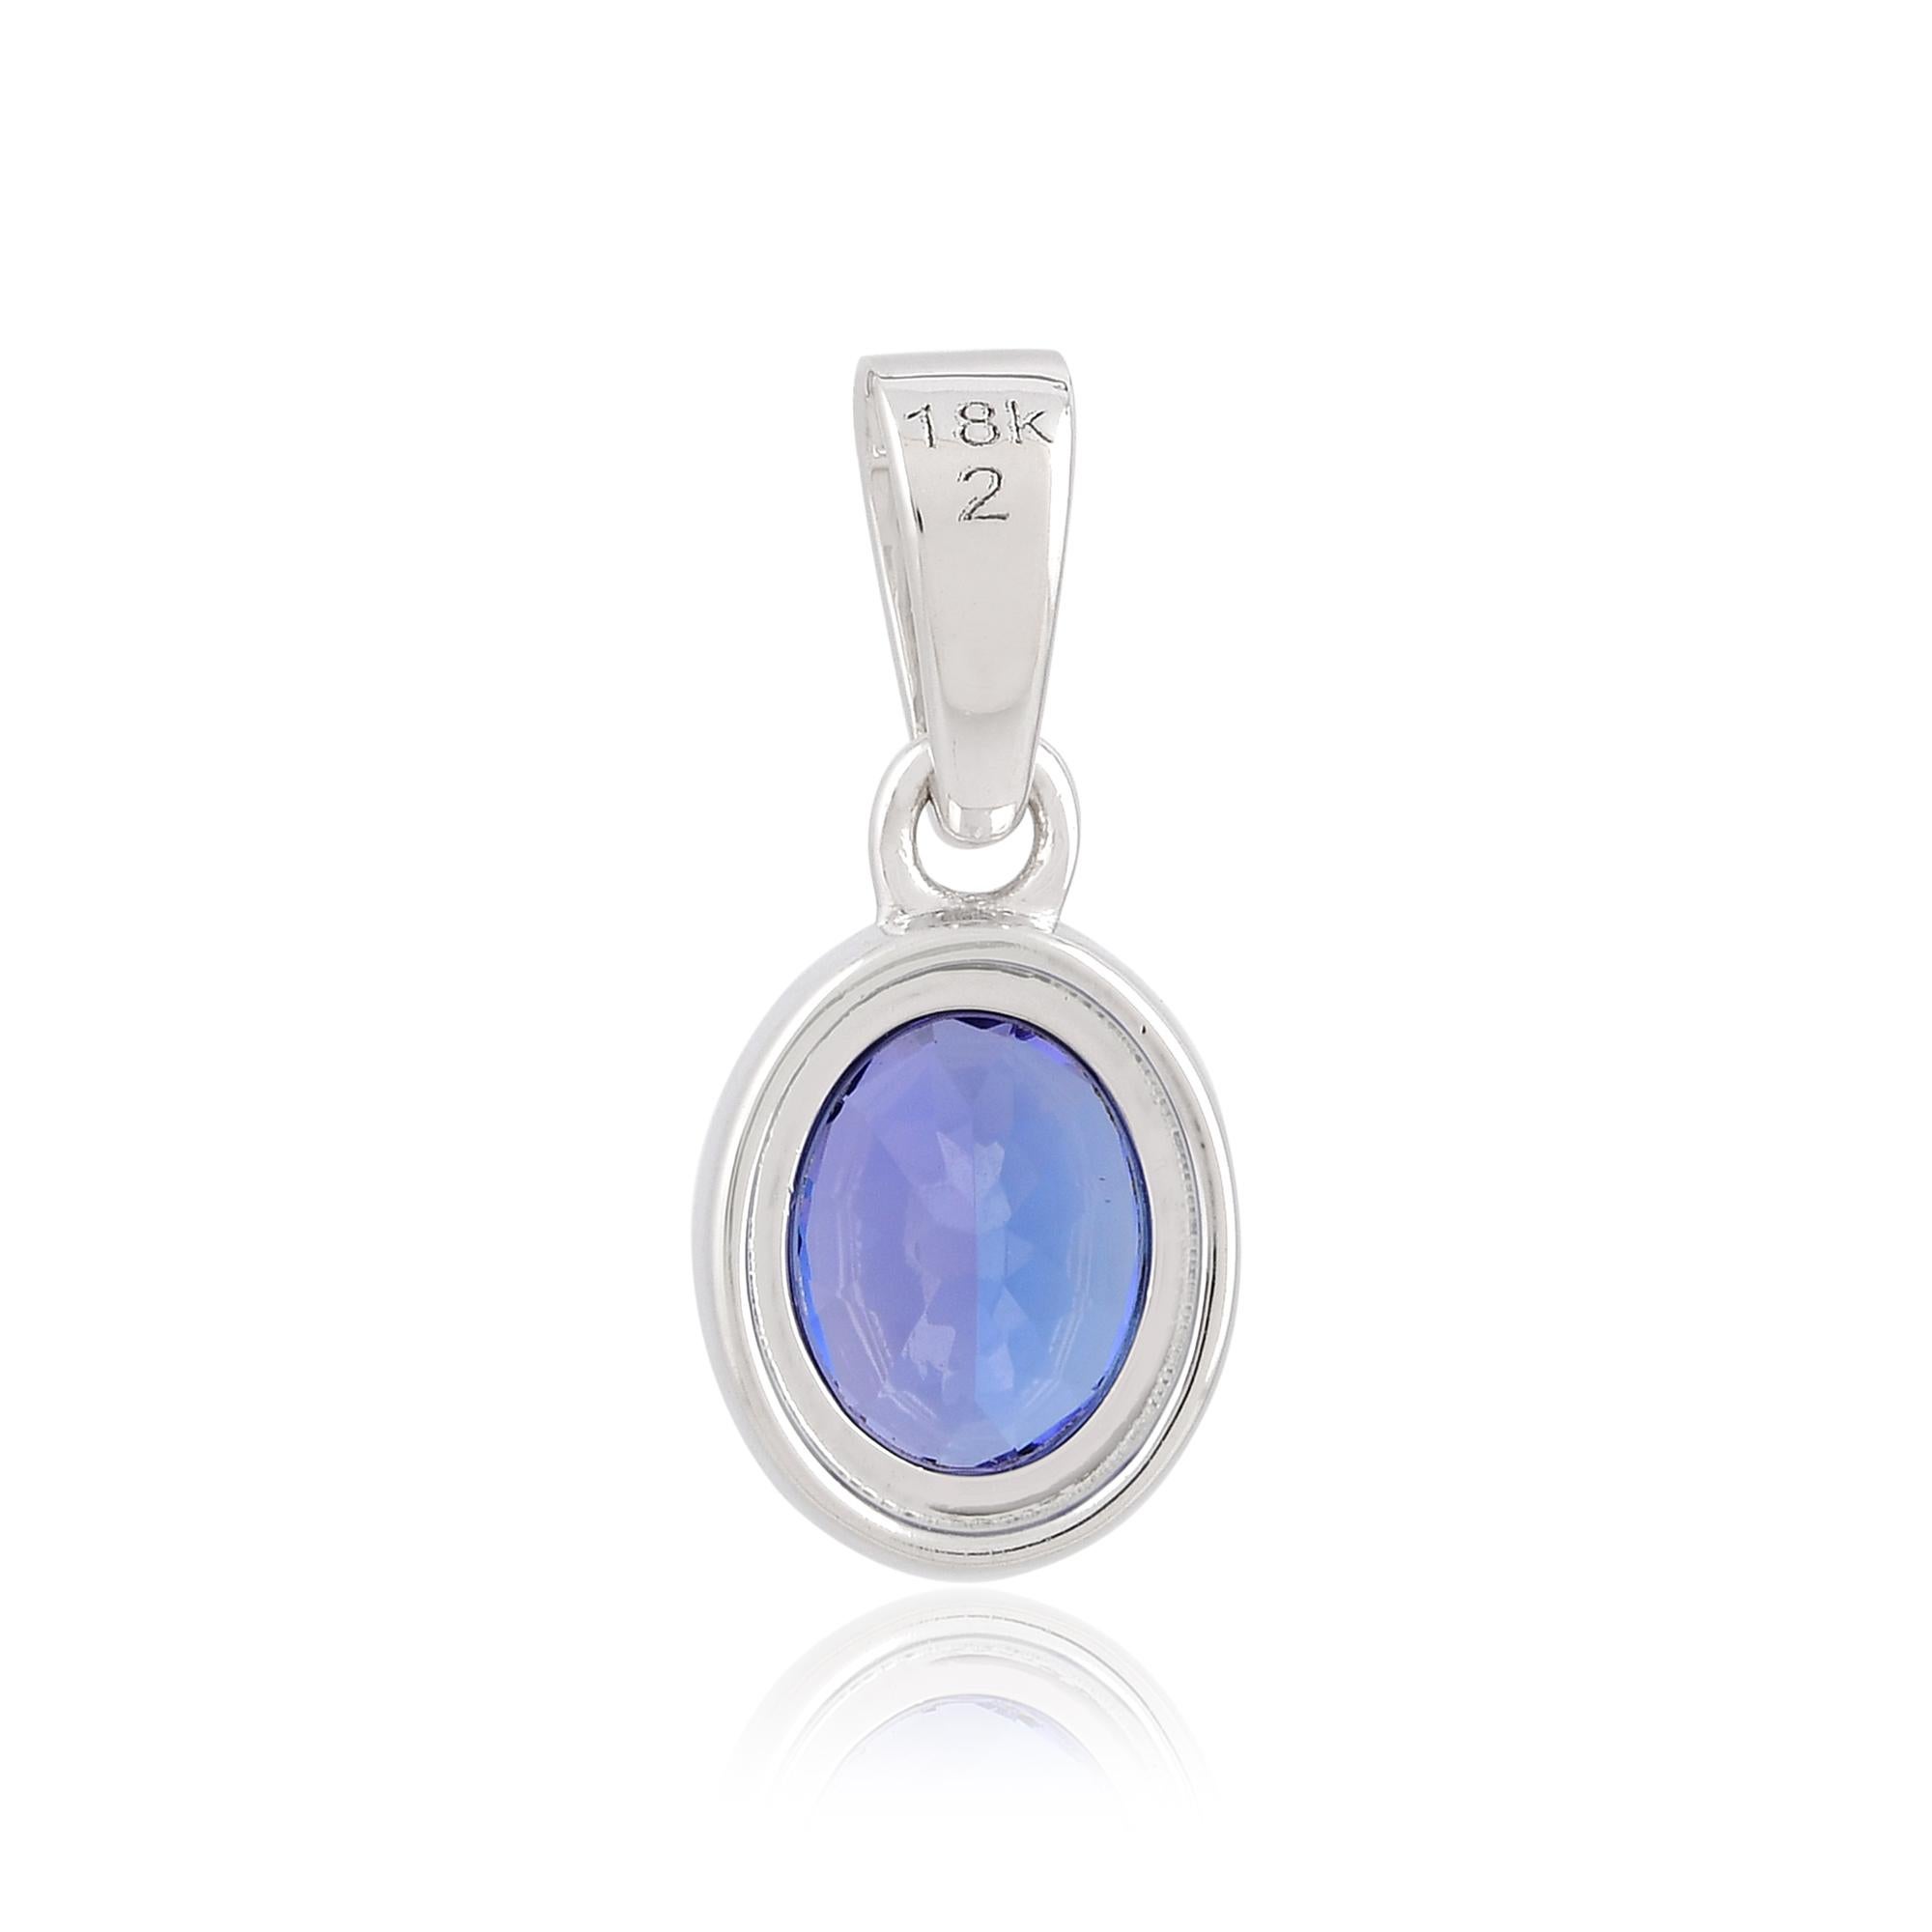 Elevate your jewelry collection with this exquisite oval-shaped tanzanite gemstone charm pendant, boasting a real carat weight of 1.82 carats. Meticulously handcrafted in 18 karat white gold, this pendant exudes elegance, sophistication, and a touch